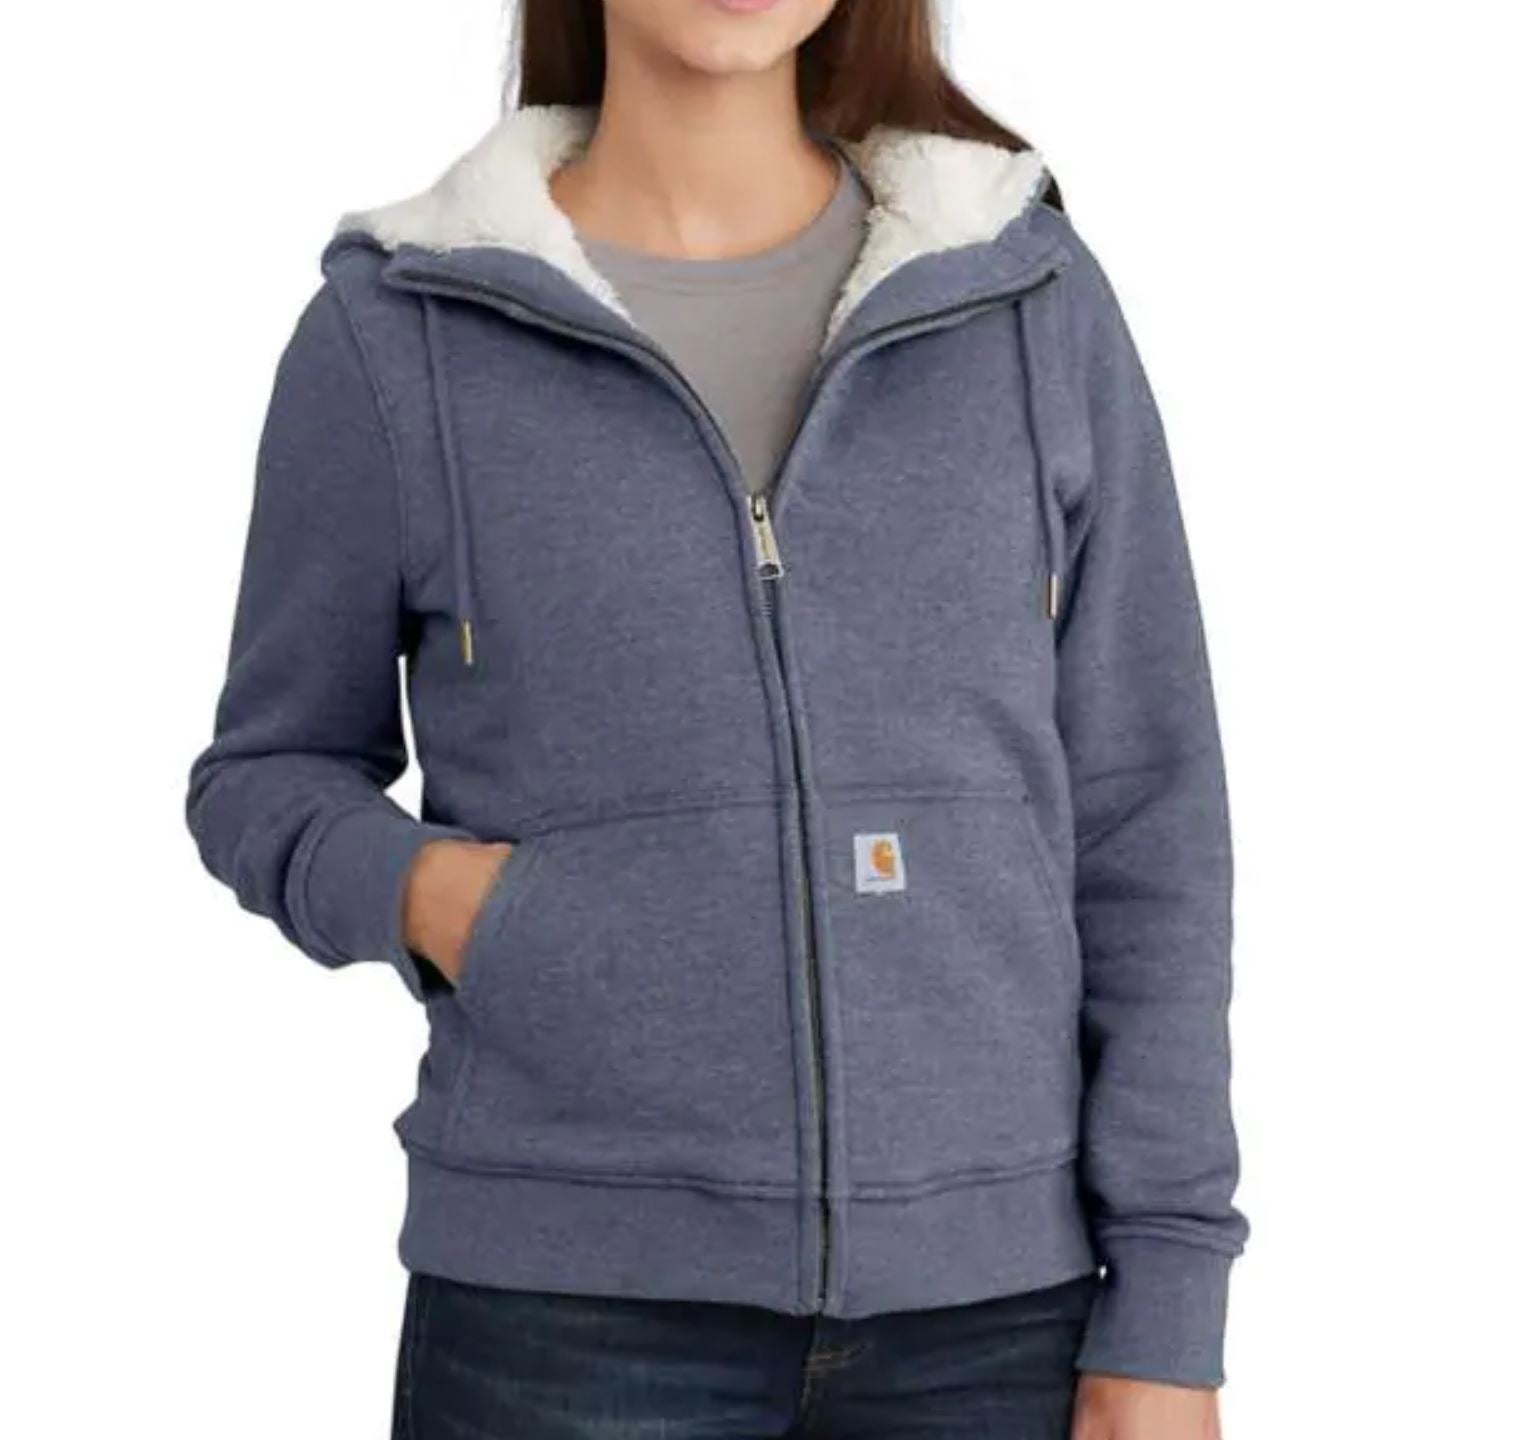 5 best Carhartt hoodies for use around farms, job sites | AGDAILY